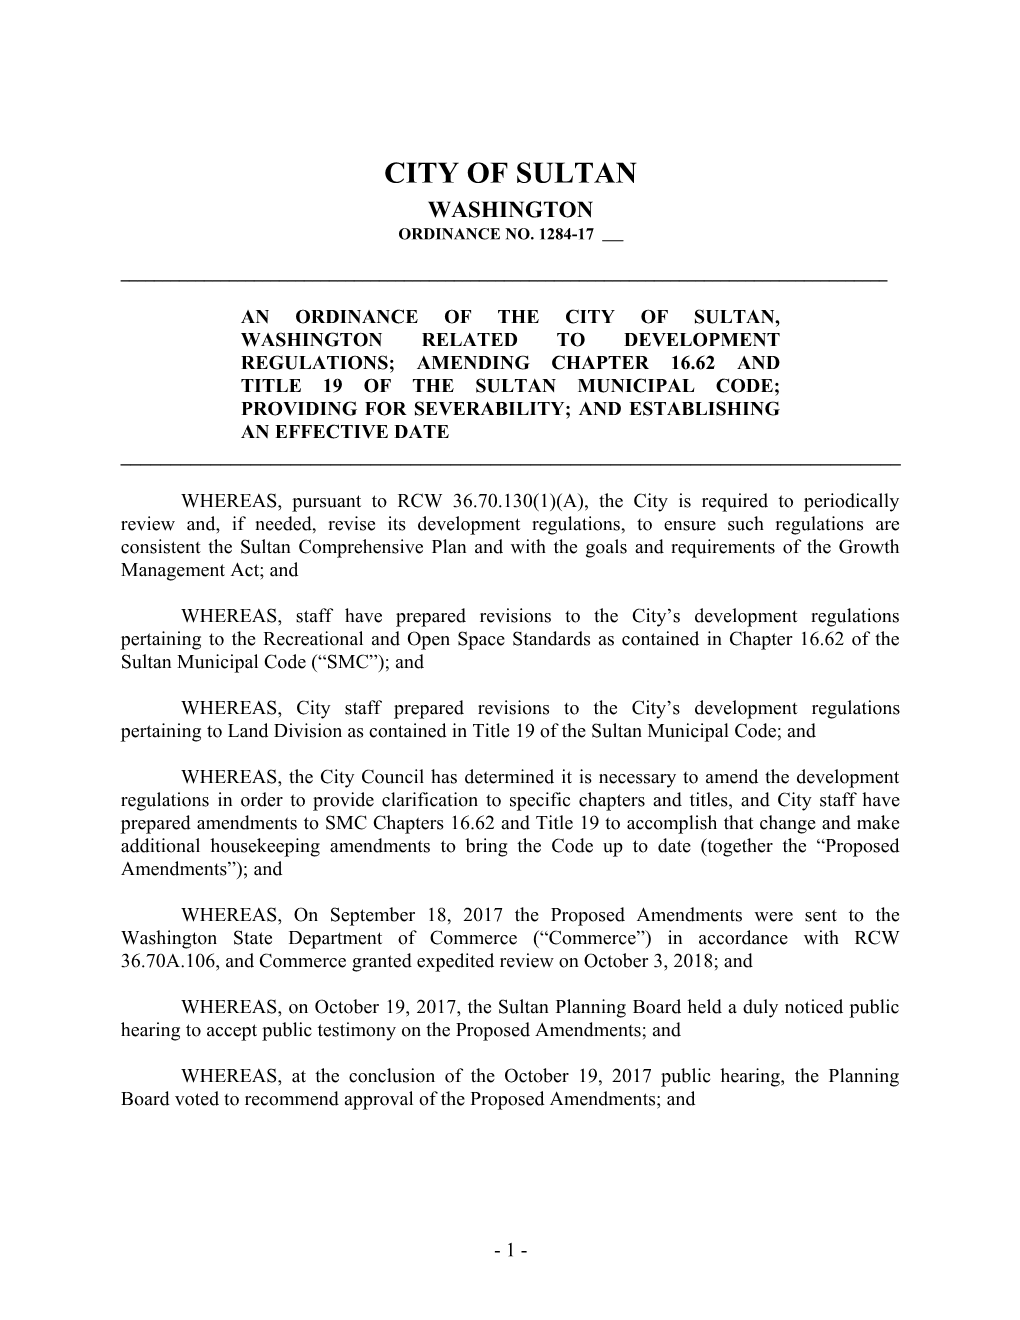 An Ordinance of the City of Sultan, Washington Related to Development Regulations; Amending